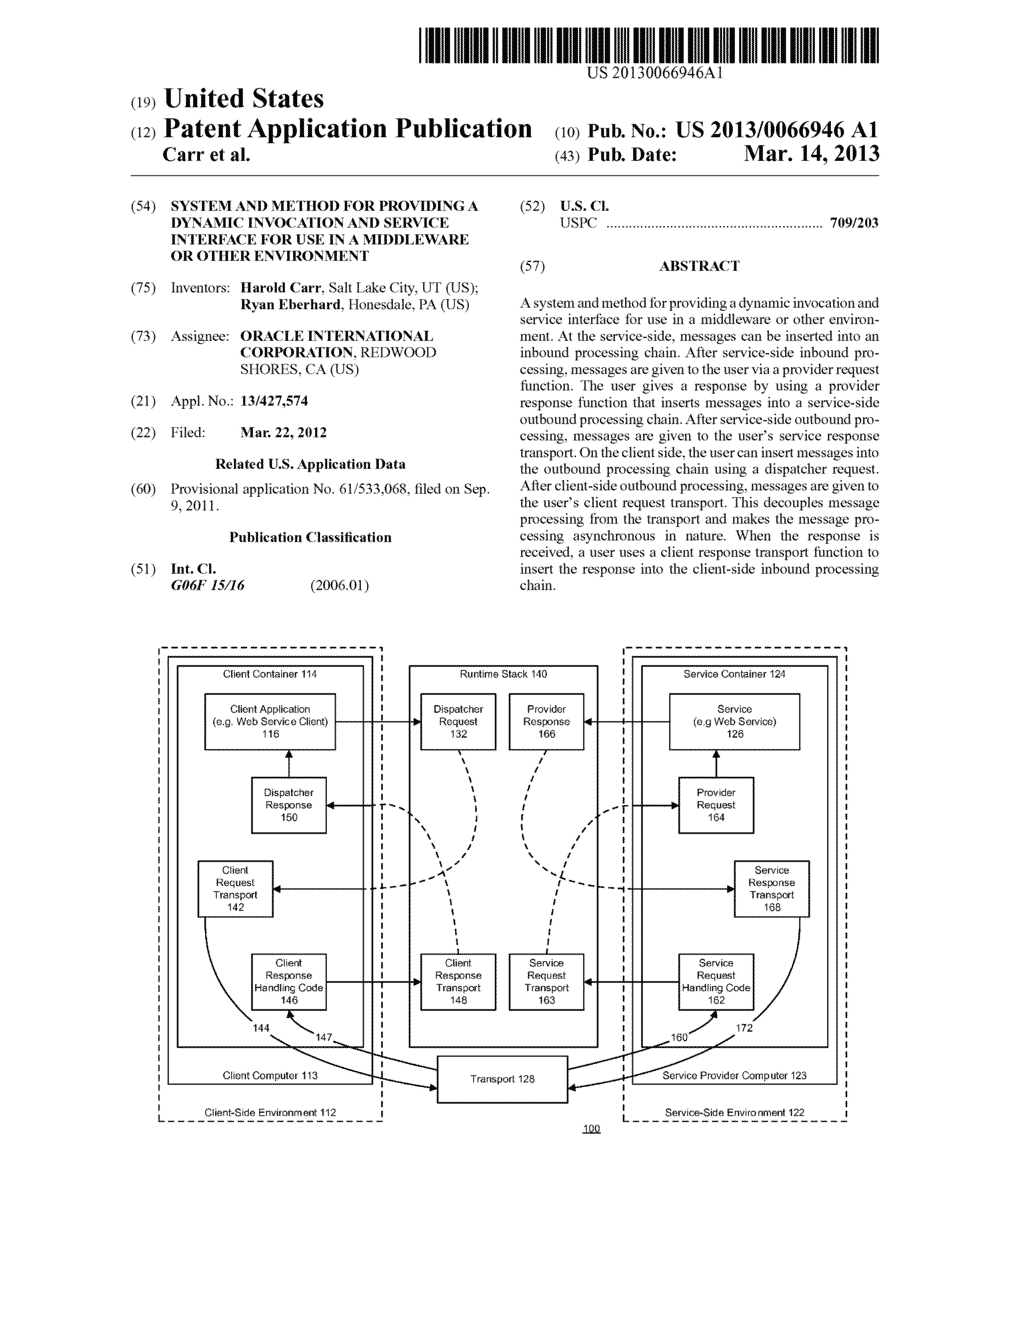 SYSTEM AND METHOD FOR PROVIDING A DYNAMIC INVOCATION AND SERVICE INTERFACE     FOR USE IN A MIDDLEWARE OR OTHER ENVIRONMENT - diagram, schematic, and image 01